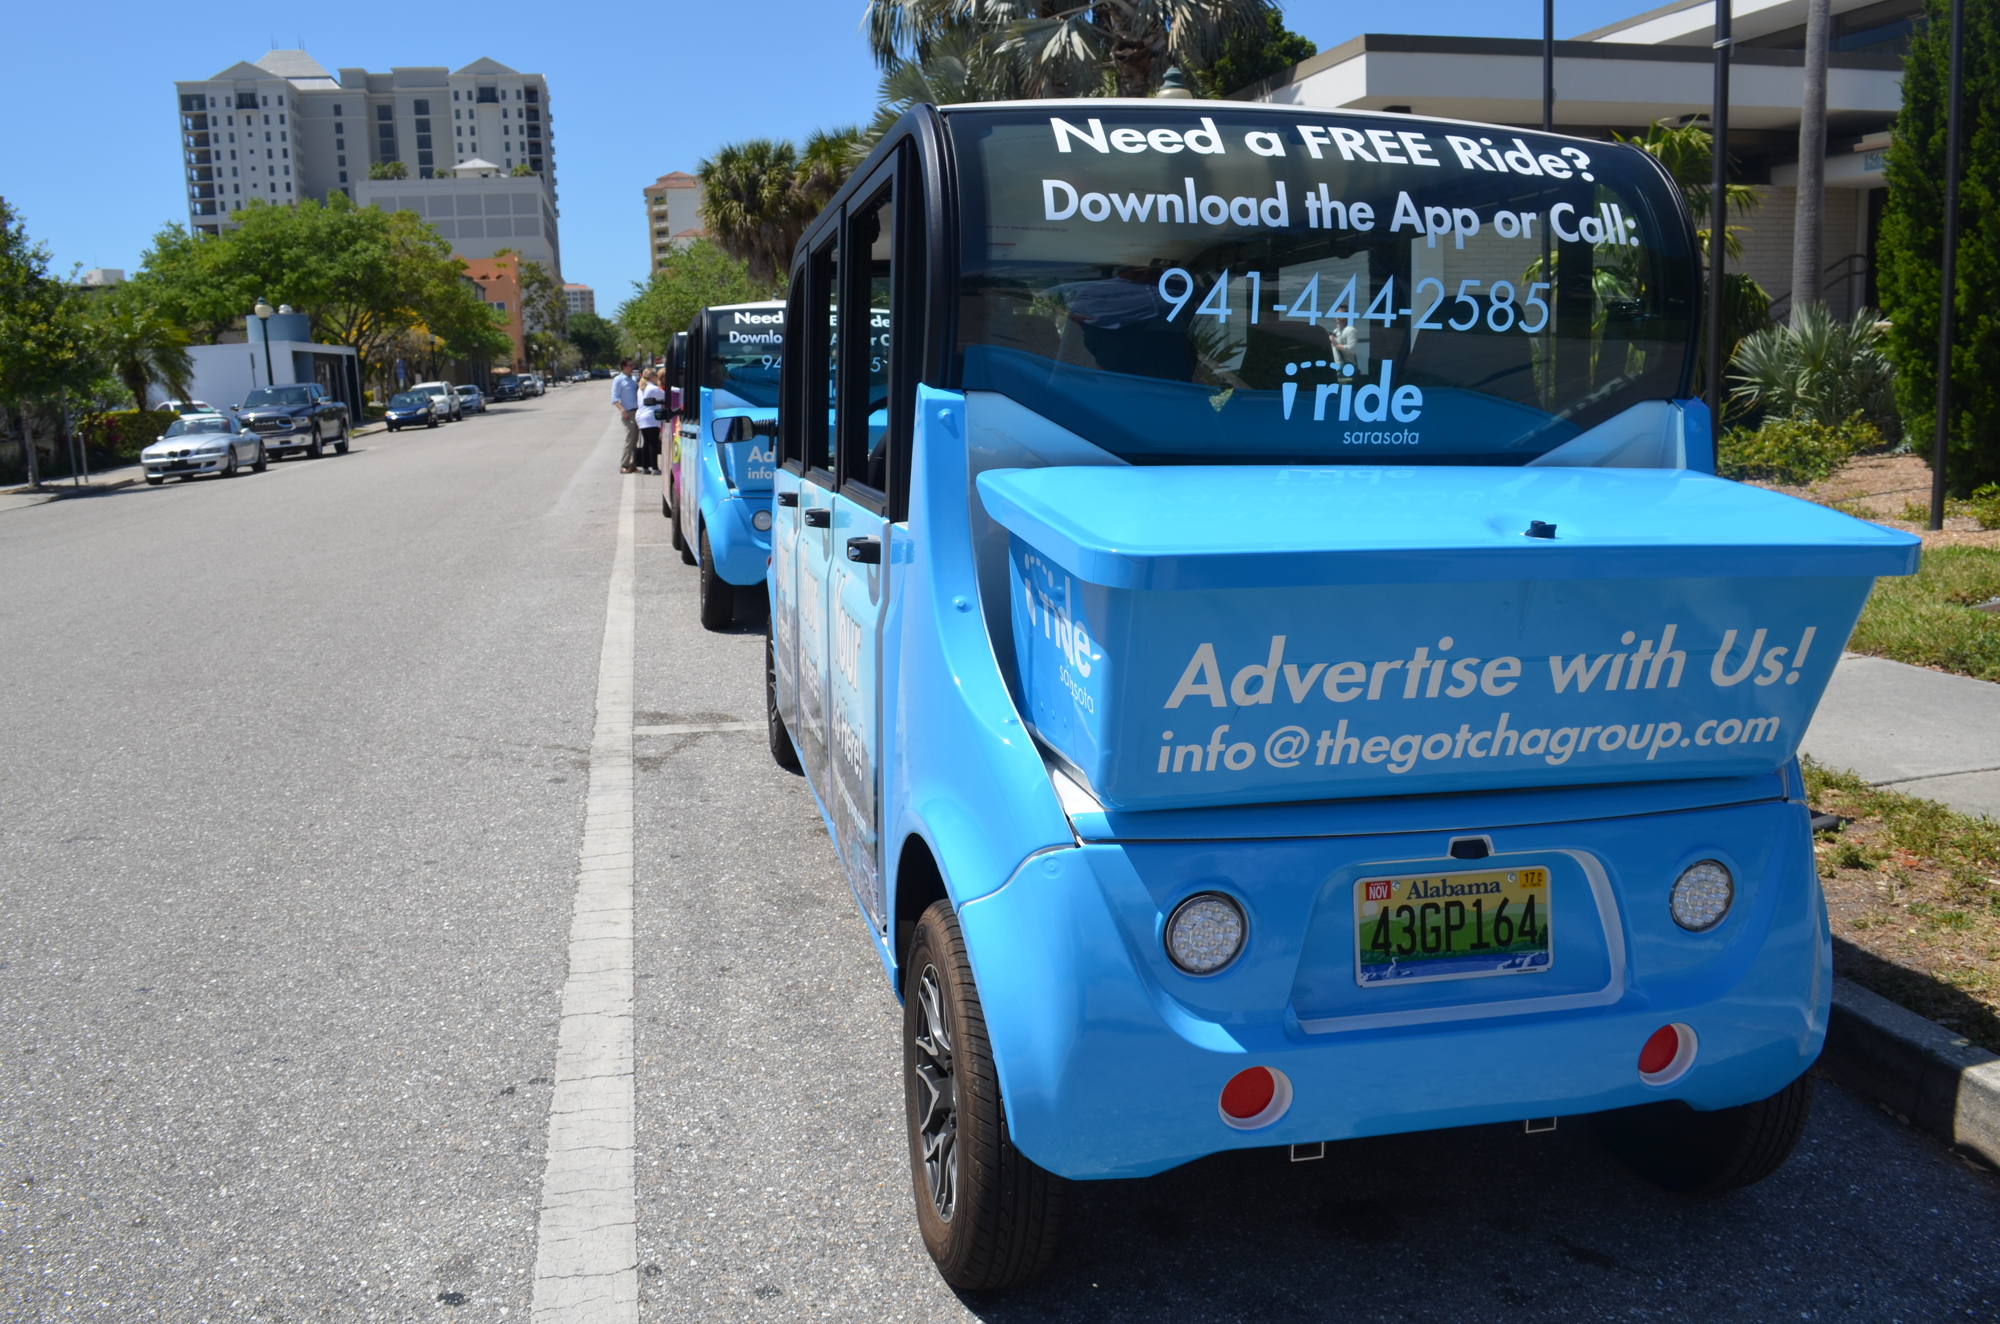 The company operating i-Ride Sarasota has been most impressed with the local interest in advertising on the vehicles.